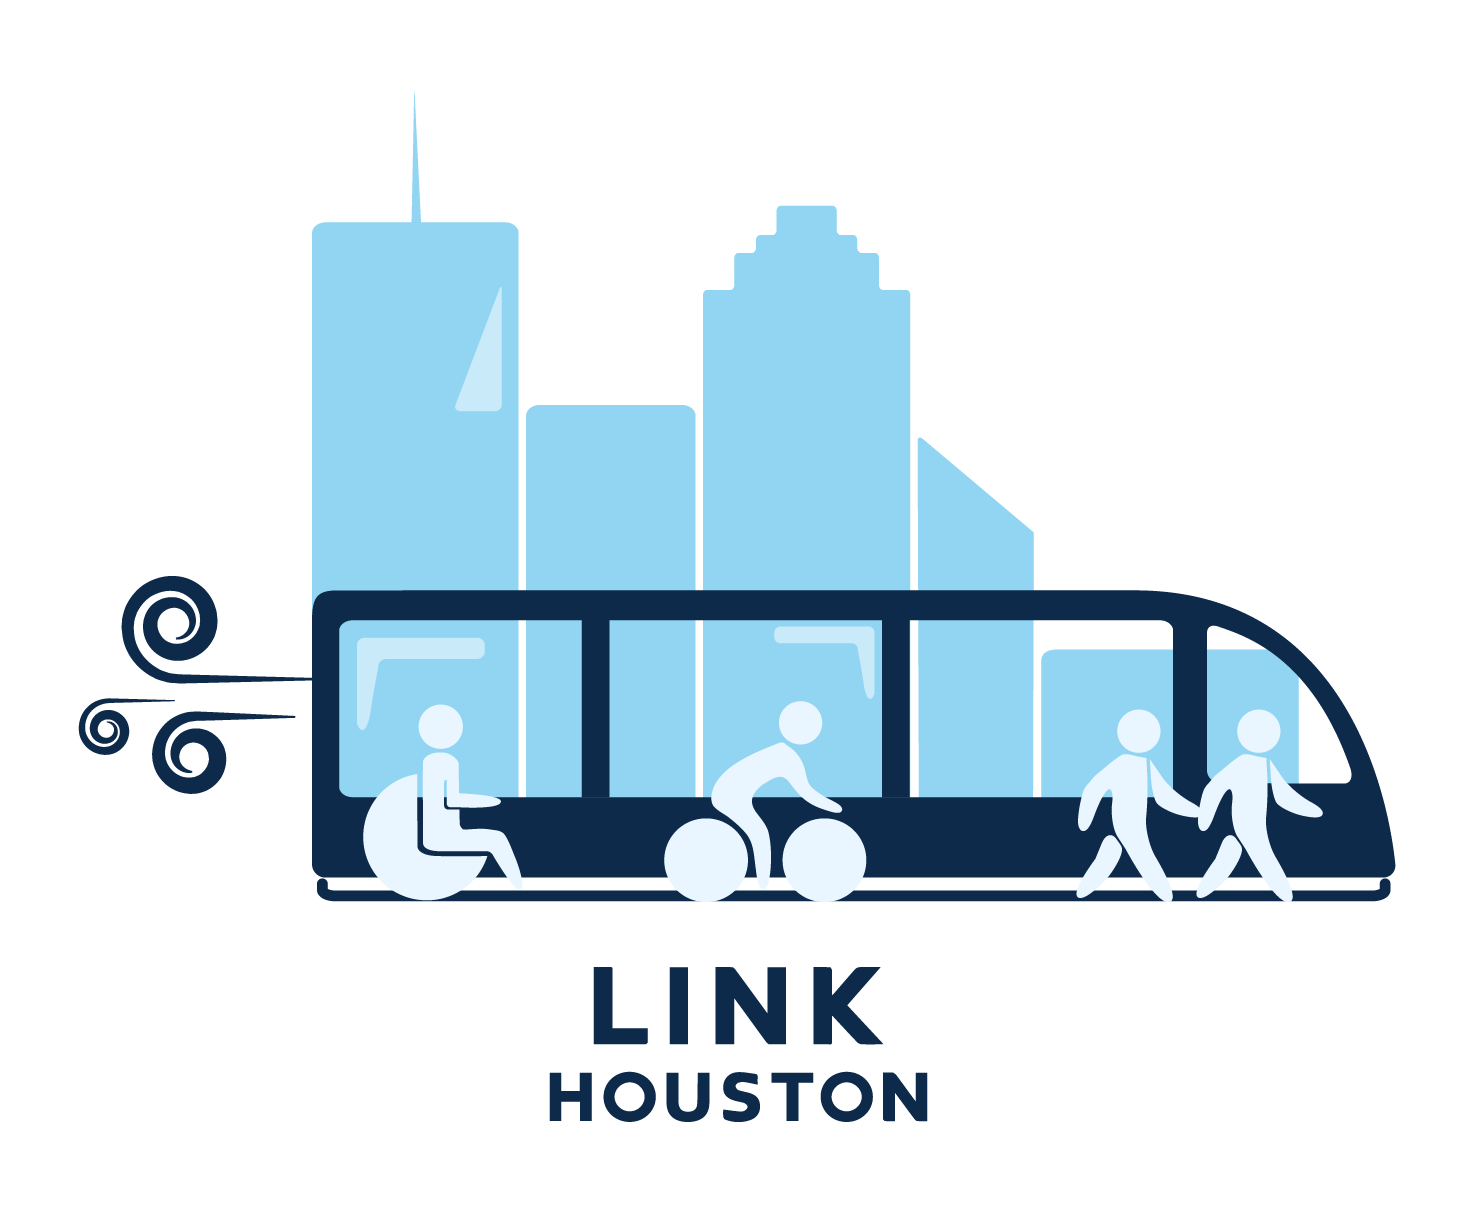 LINK Houston event logo featuring a city background, train, a person in wheelchair, a person on a bike, and two people walking. 